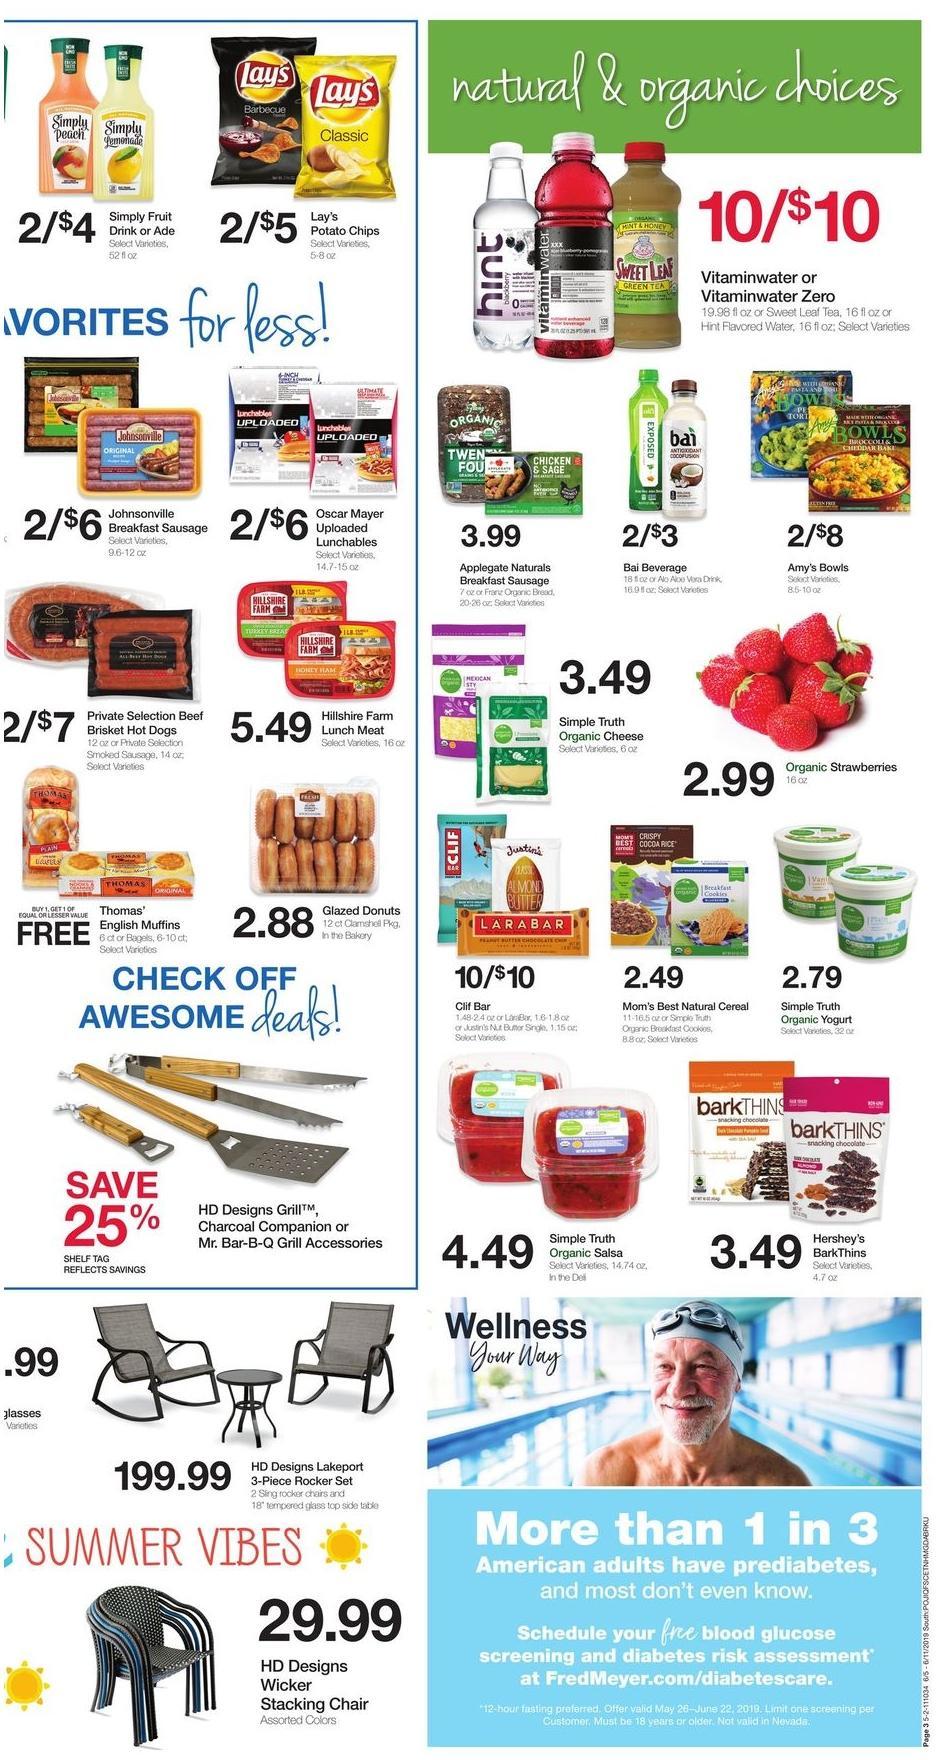 Fred Meyer Weekly Ad from June 5